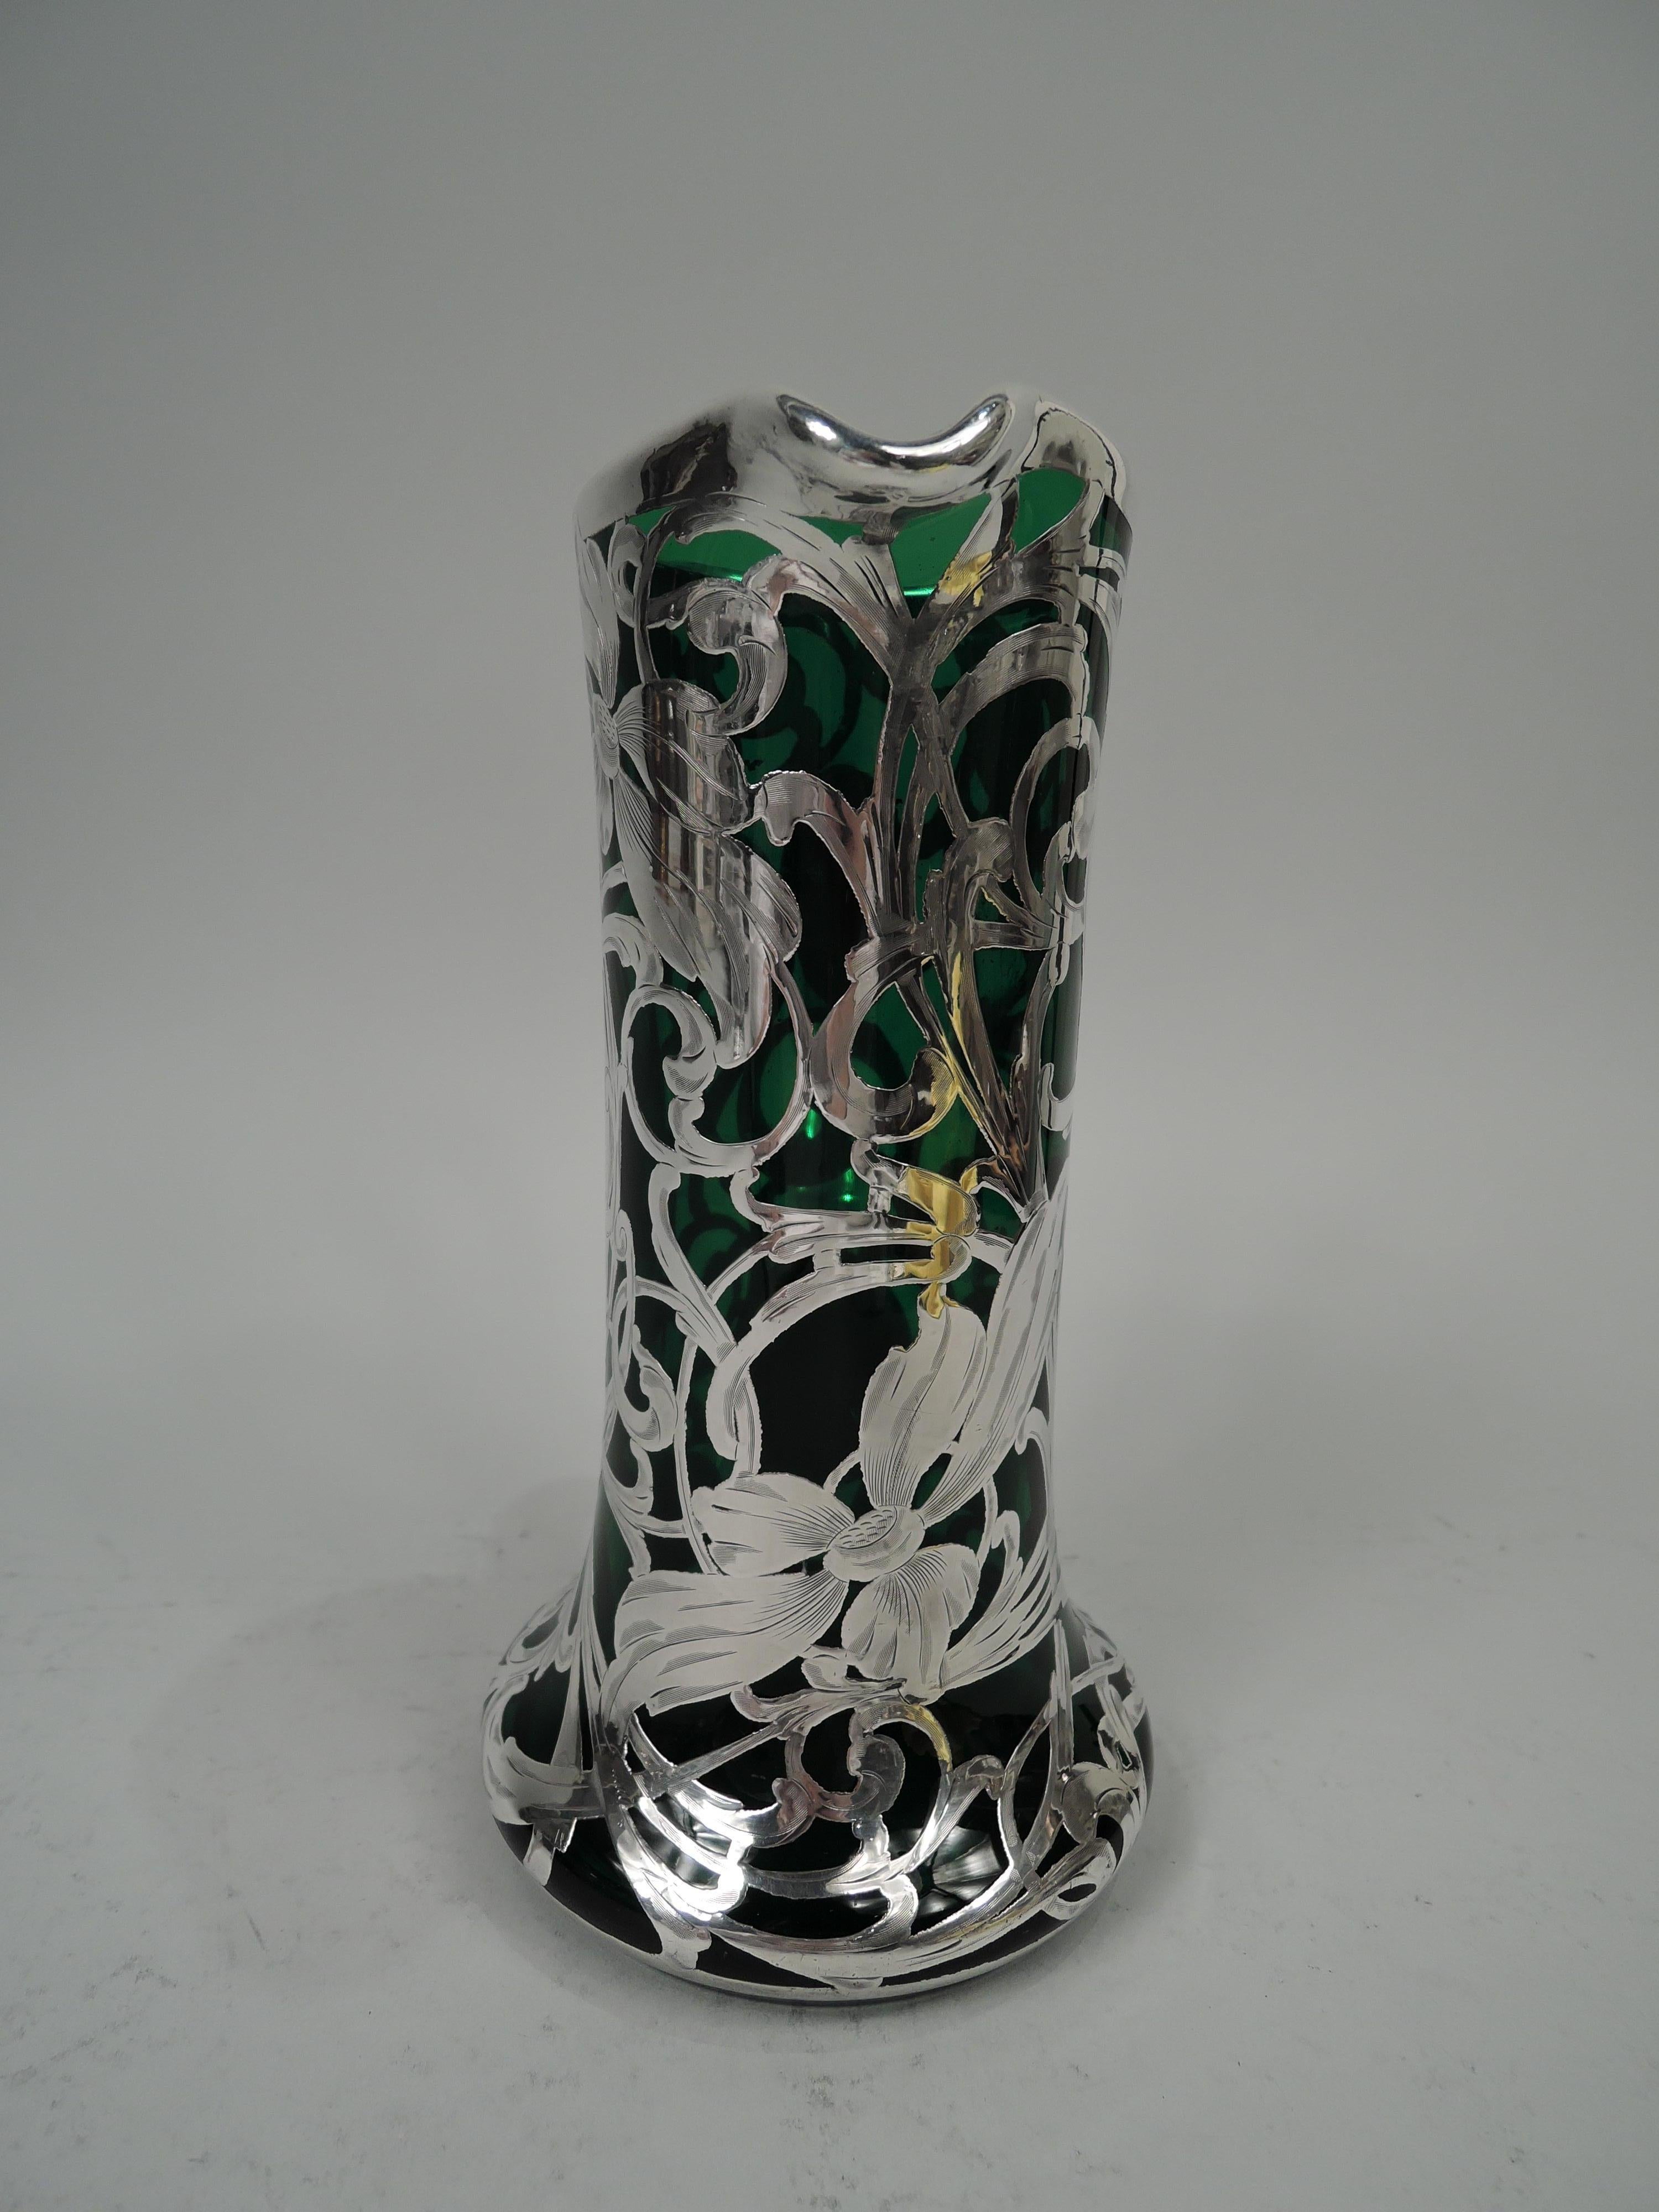 American Art Nouveau glass claret jug with engraved silver overlay, ca 1900. Cylindrical with small lip spout and spread base. C-scroll handle in silver collar. Overlay in form of entwined and whiplash tendrils with distended and elongated flower